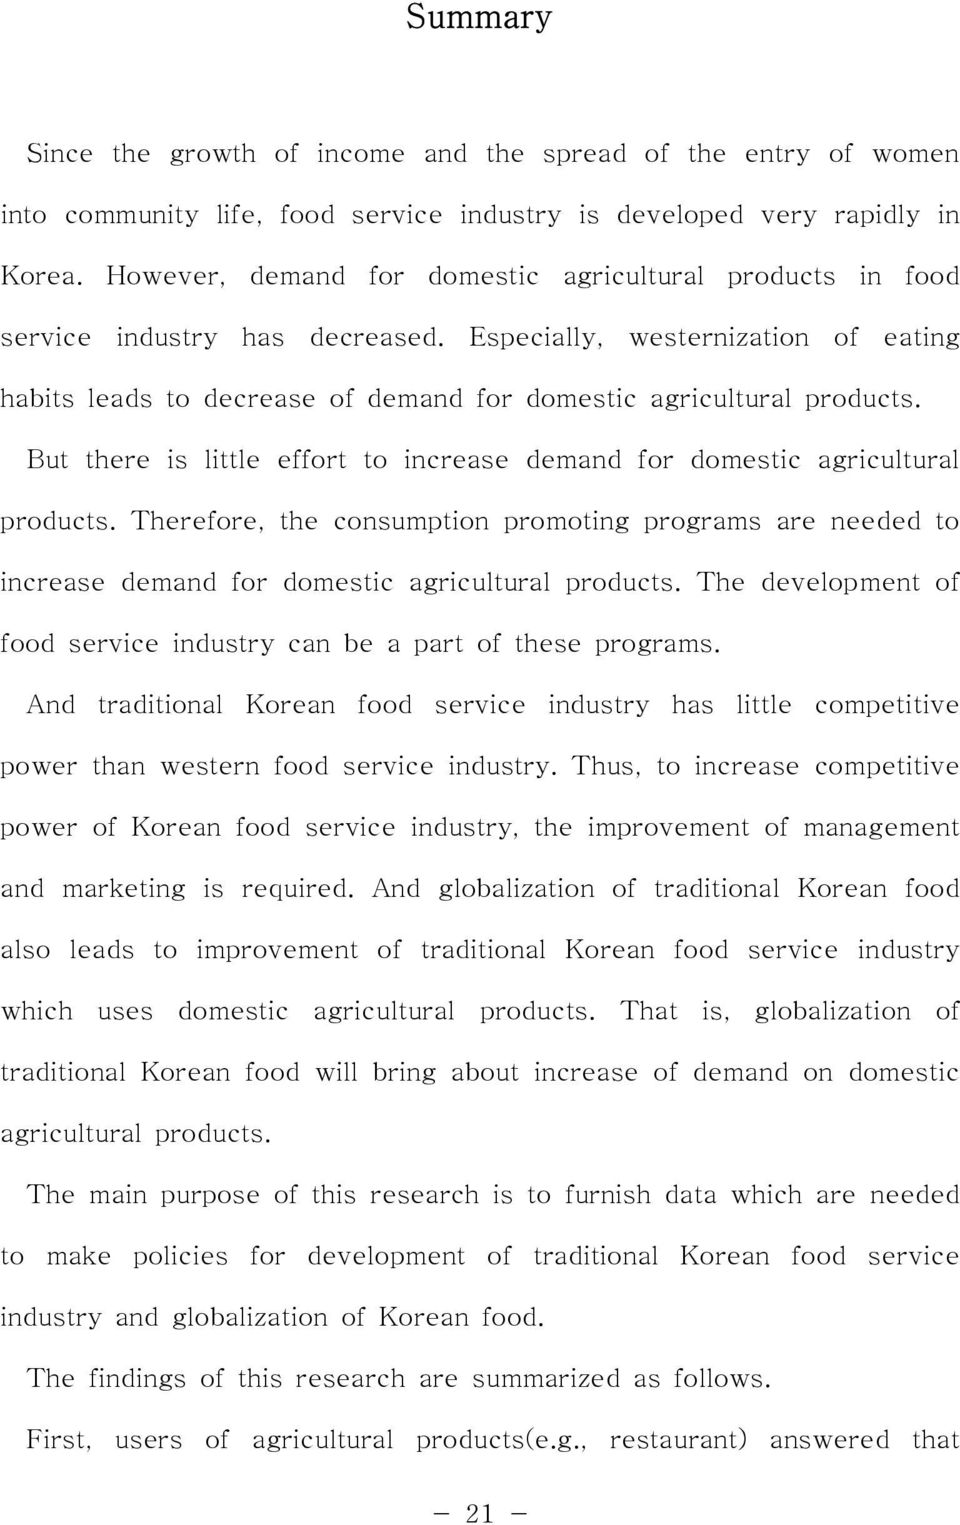 But there is little effort to increase demand for domestic agricultural products. Therefore, the consumption promoting programs are needed to increase demand for domestic agricultural products.